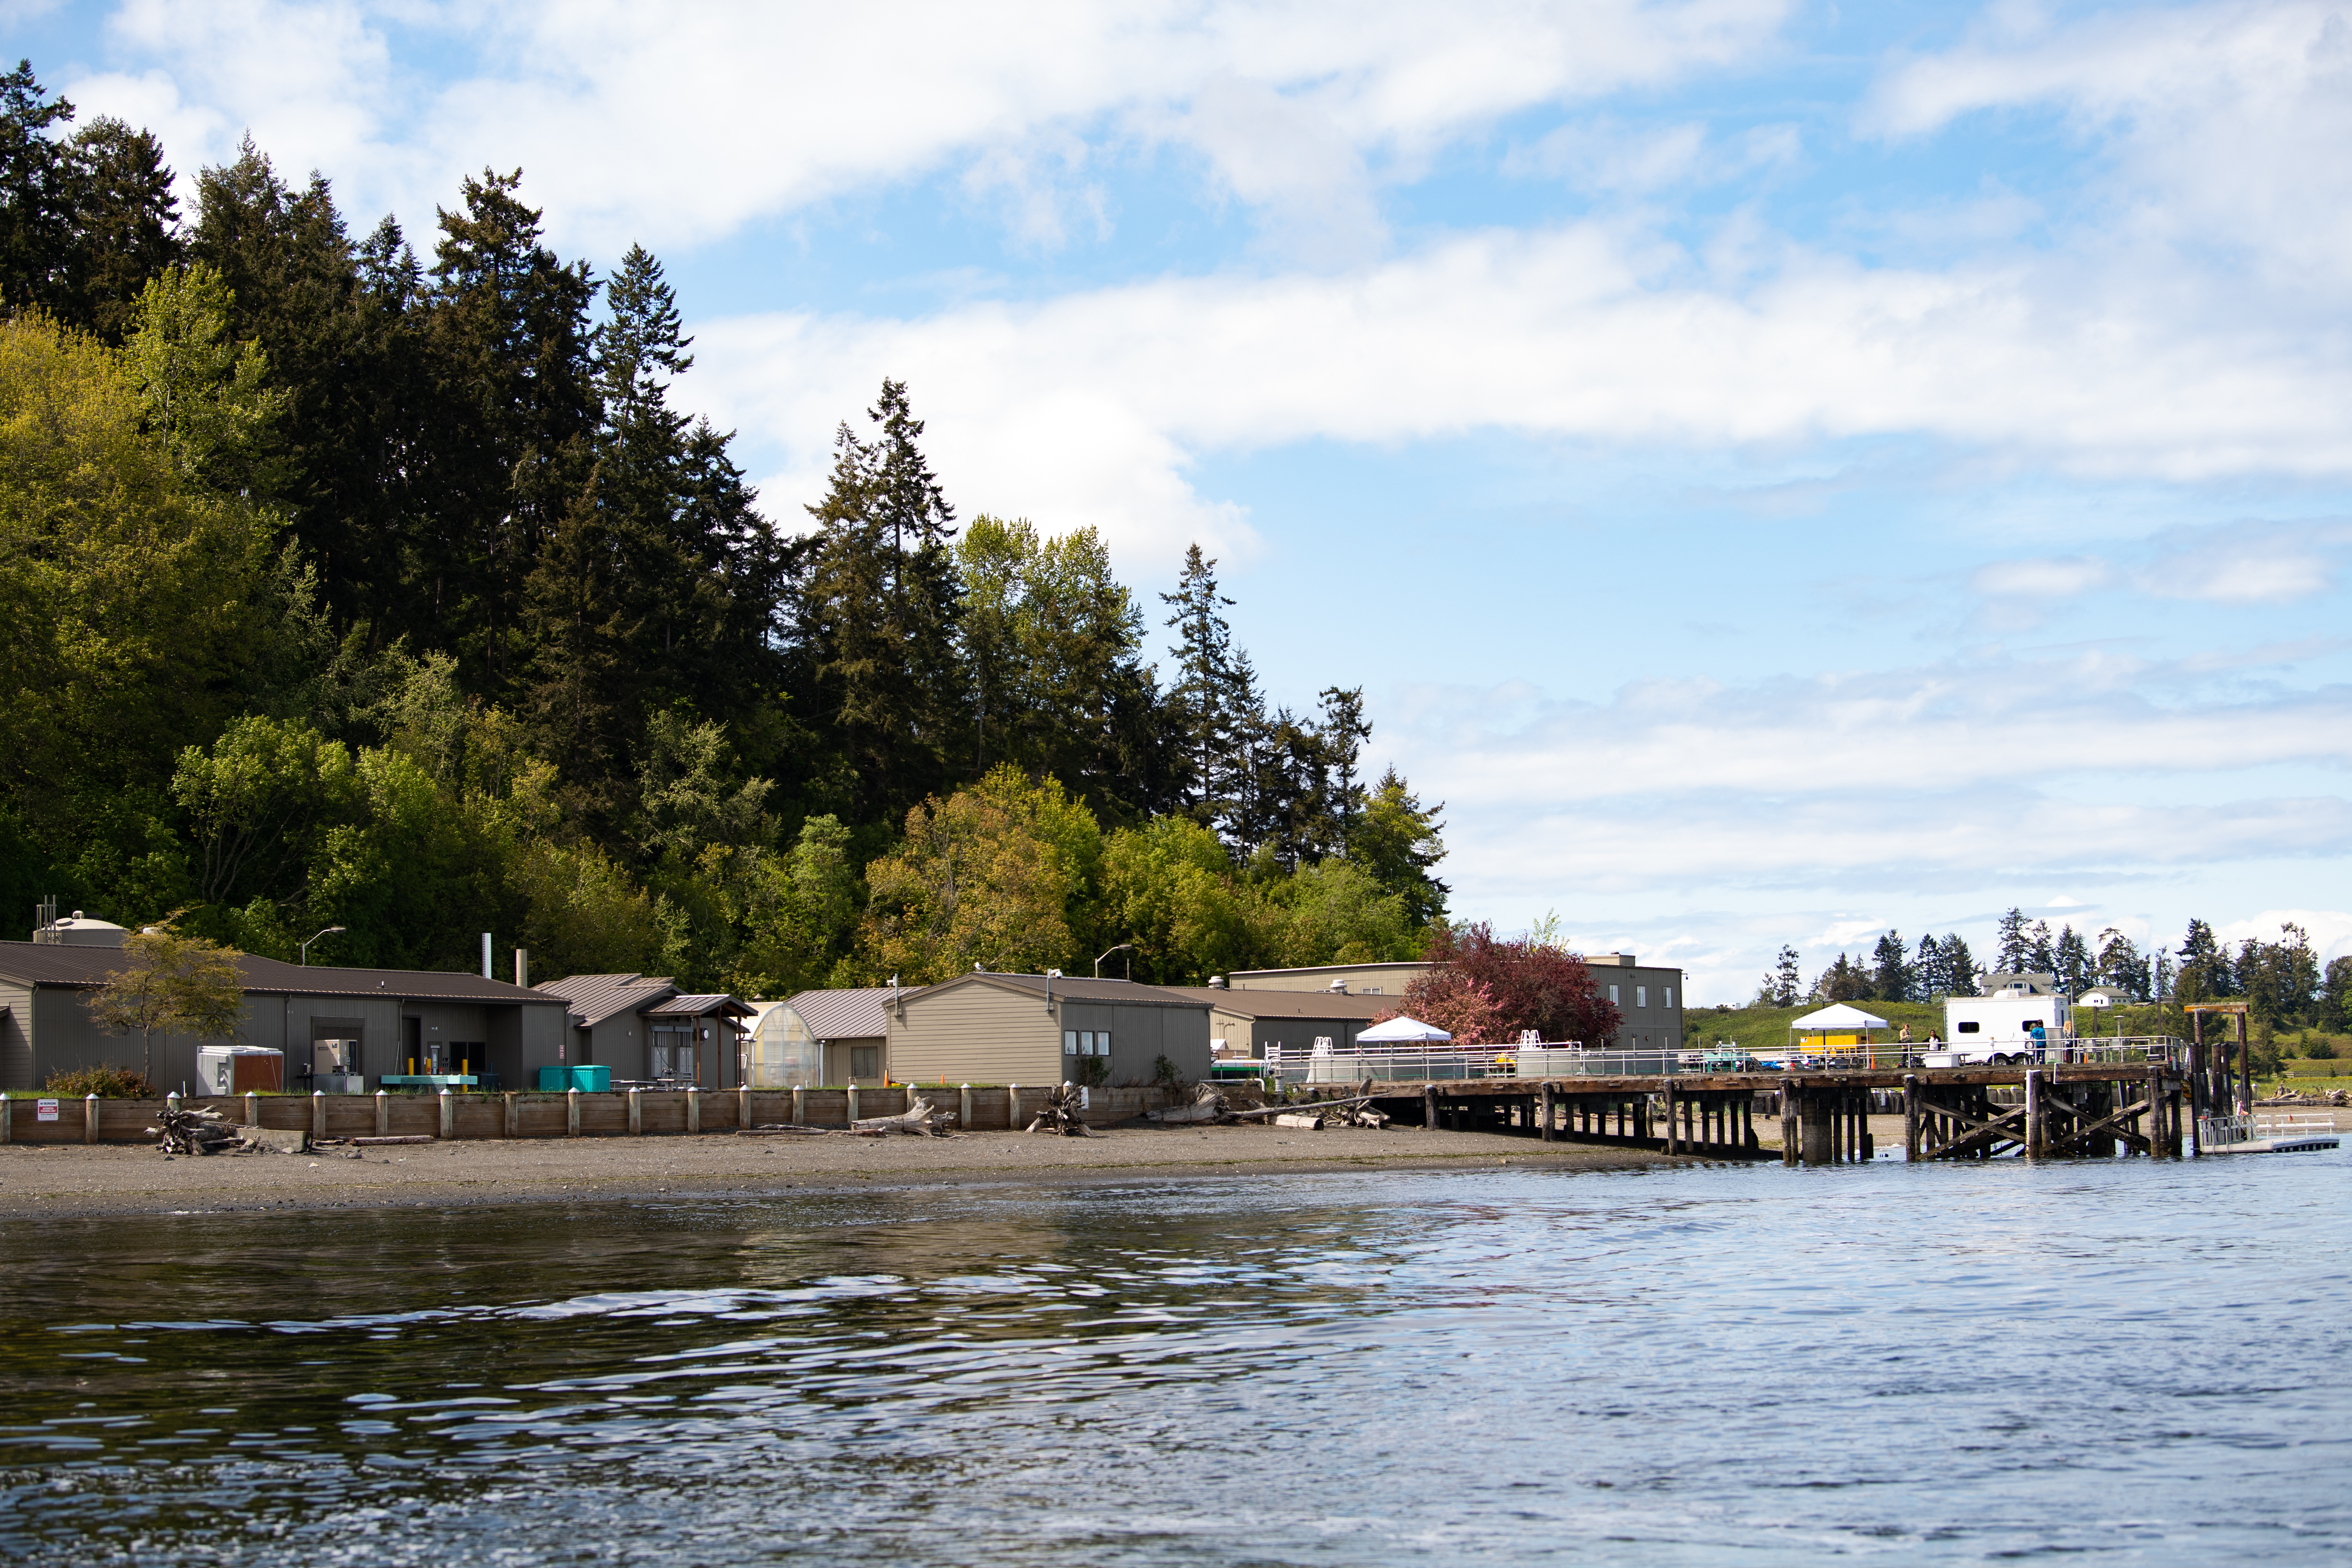 Photograph of PNNL-Sequim campus showing the coastline and buildings